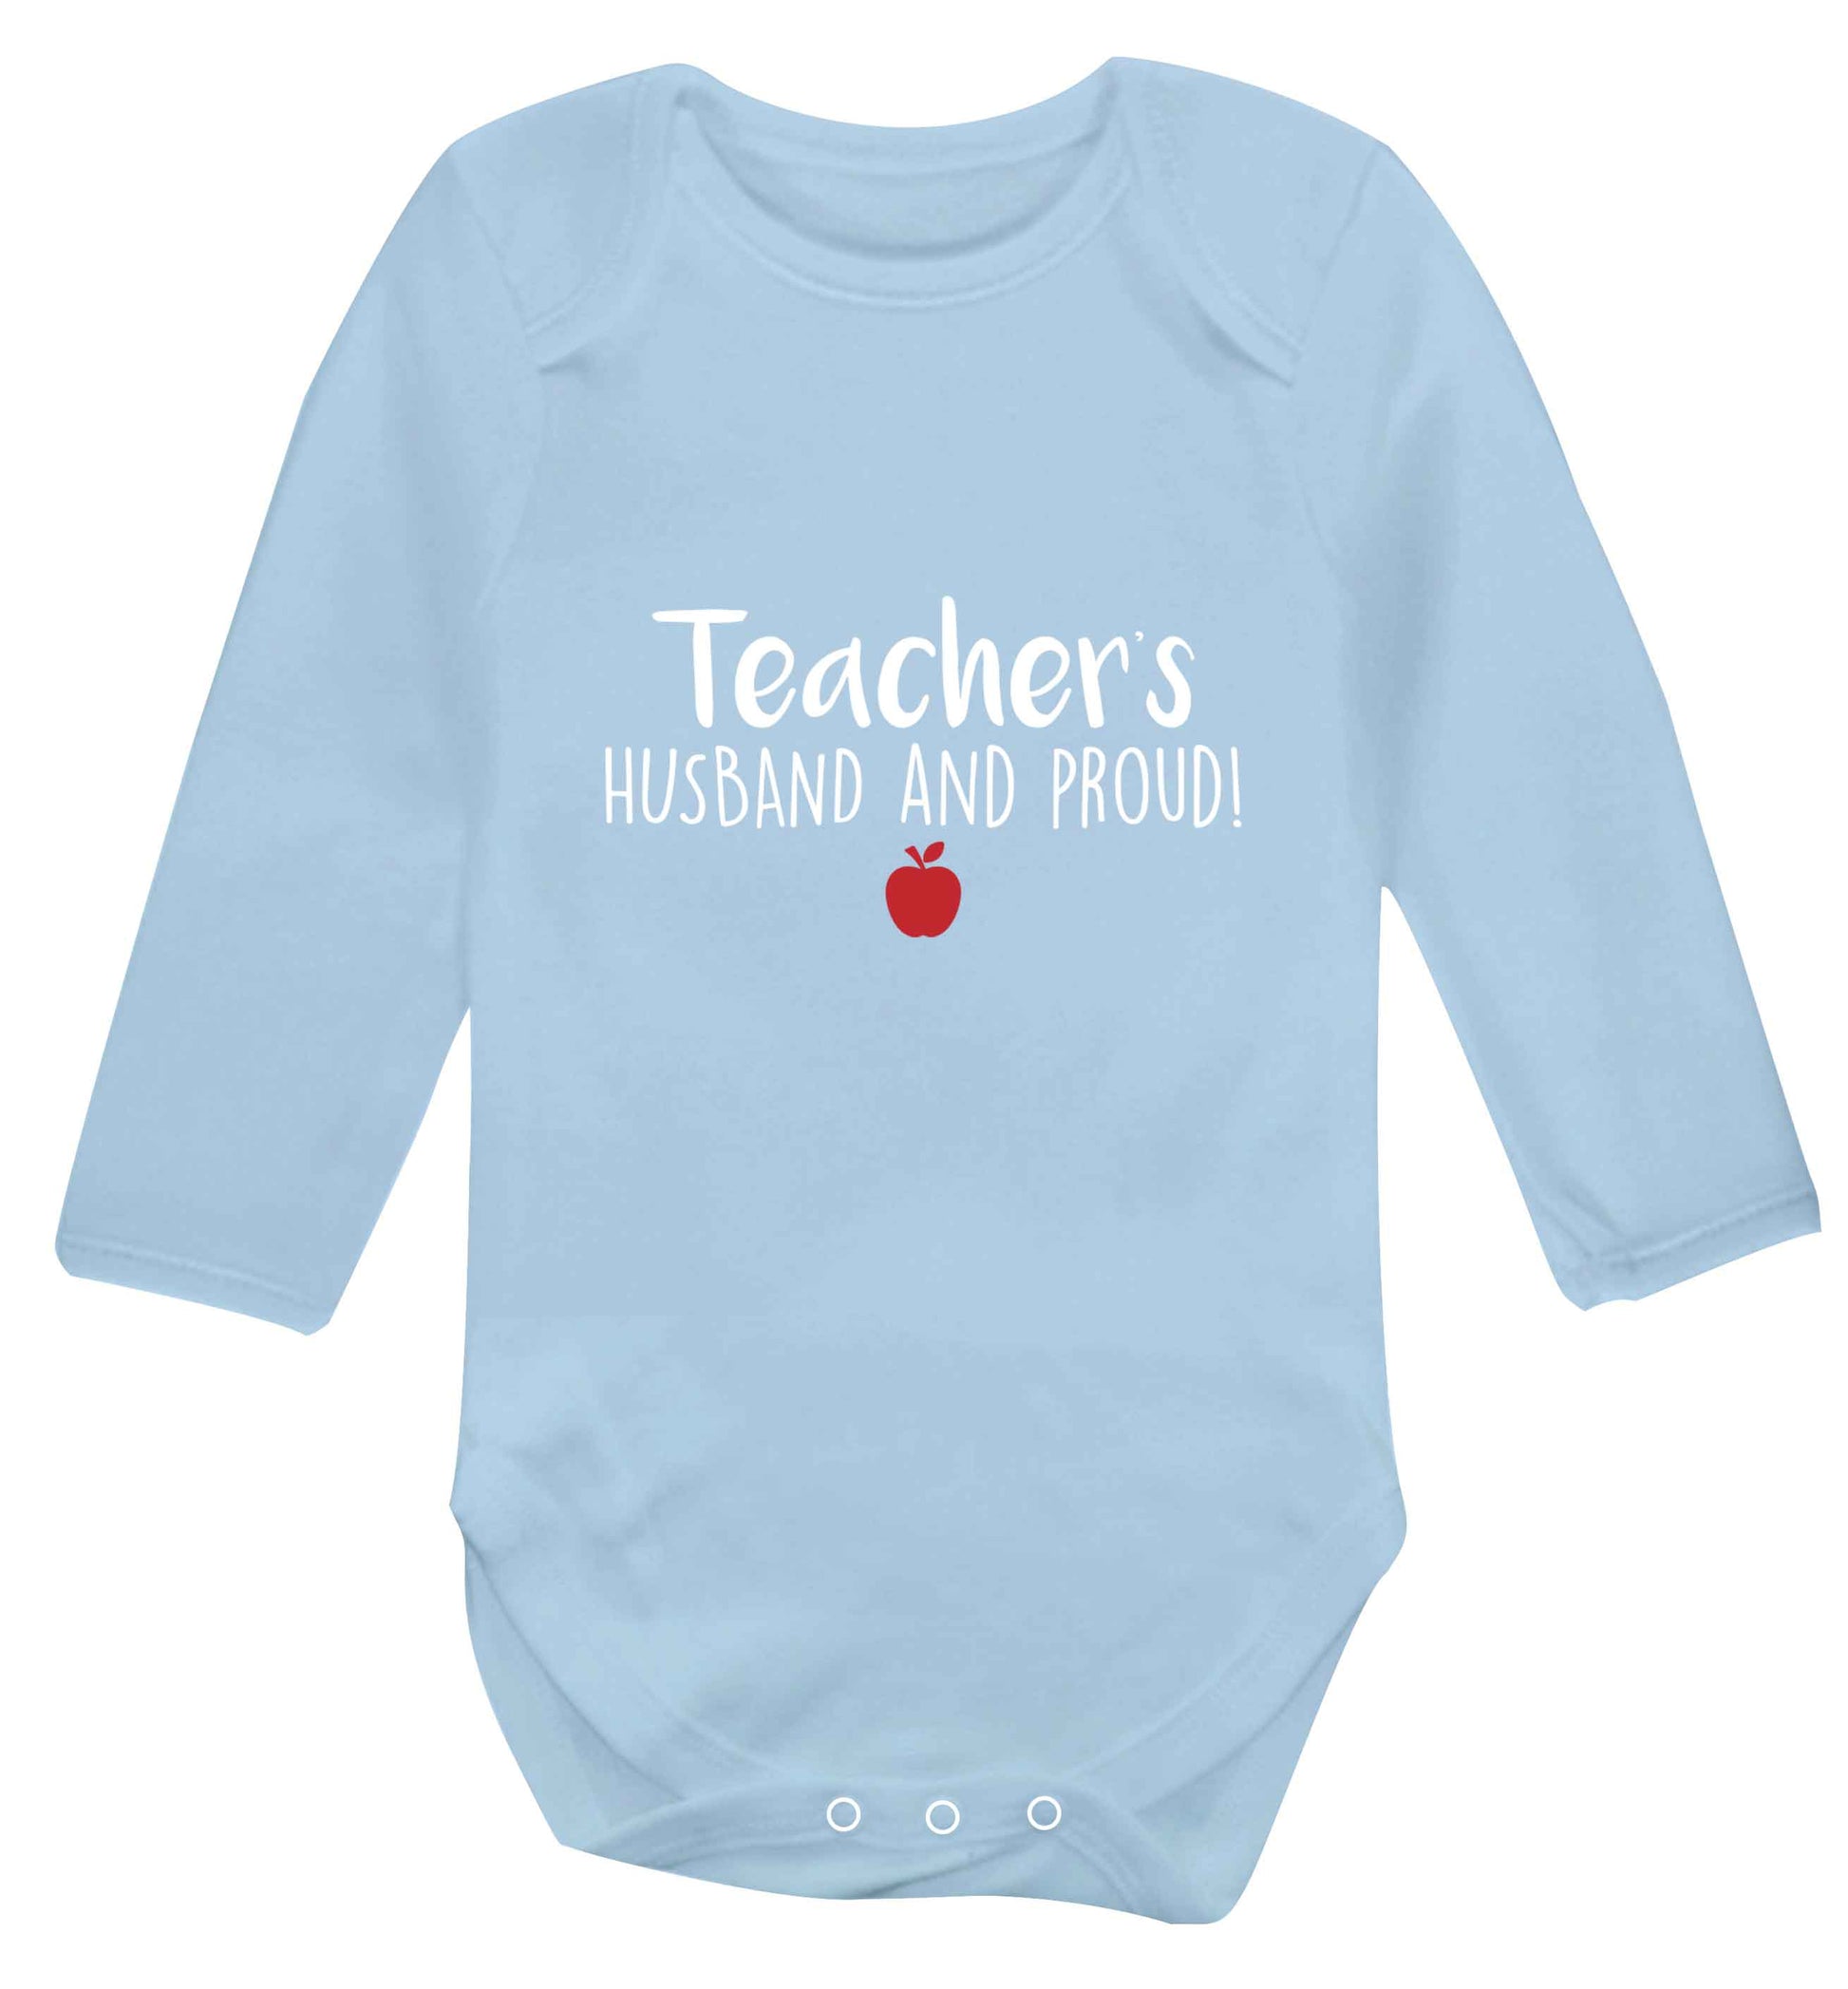 Teachers husband and proud baby vest long sleeved pale blue 6-12 months